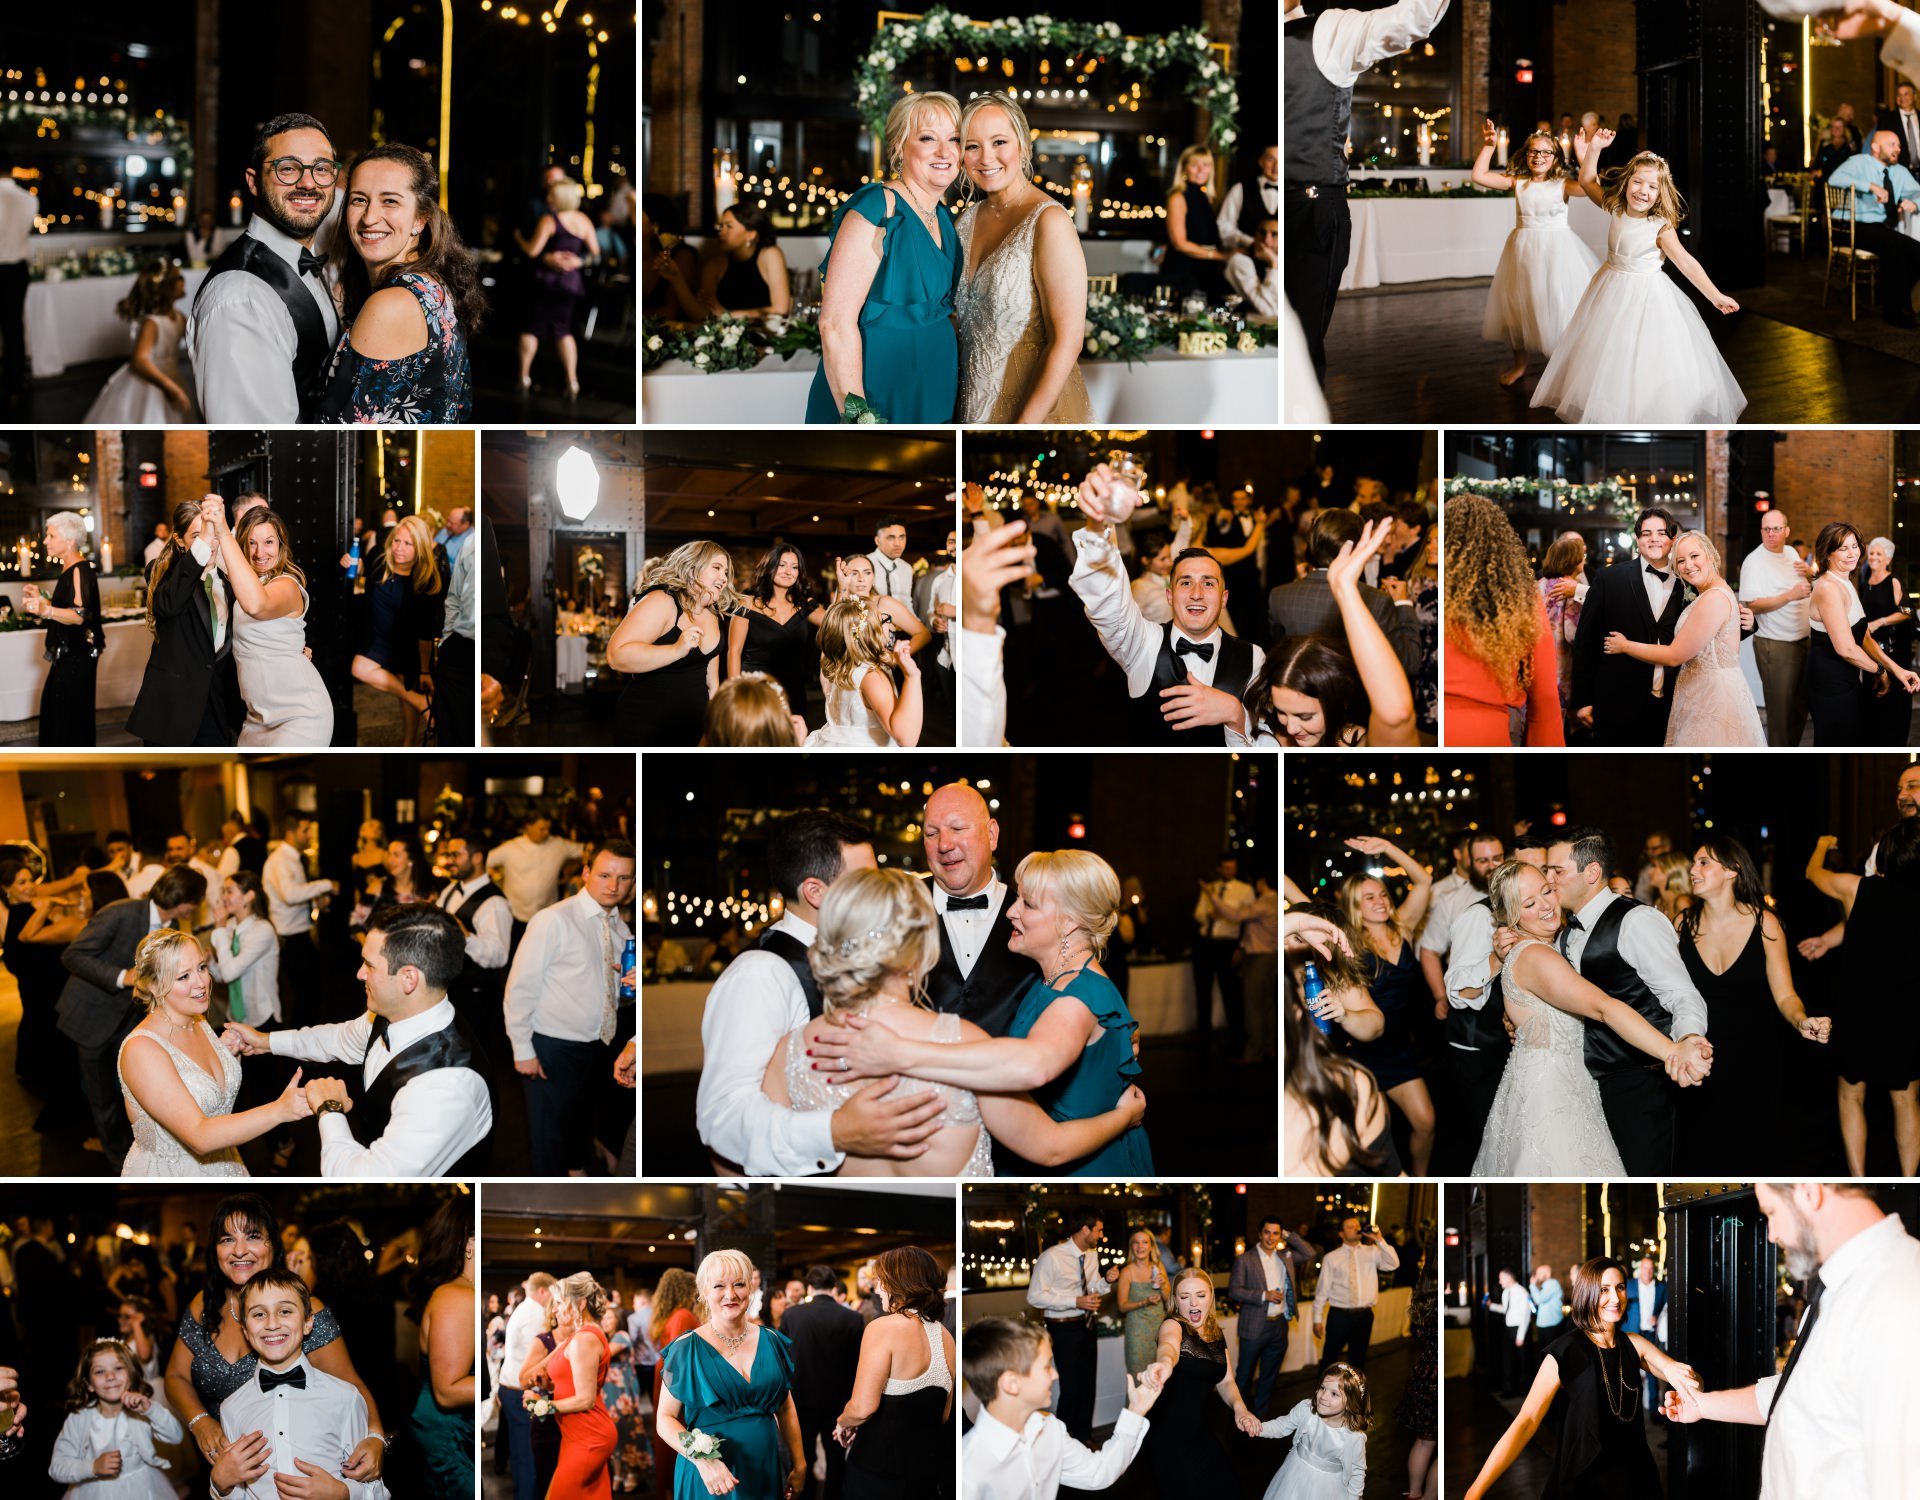 Cleveland Wedding Photographer at Windows on the River 02 18.jpg